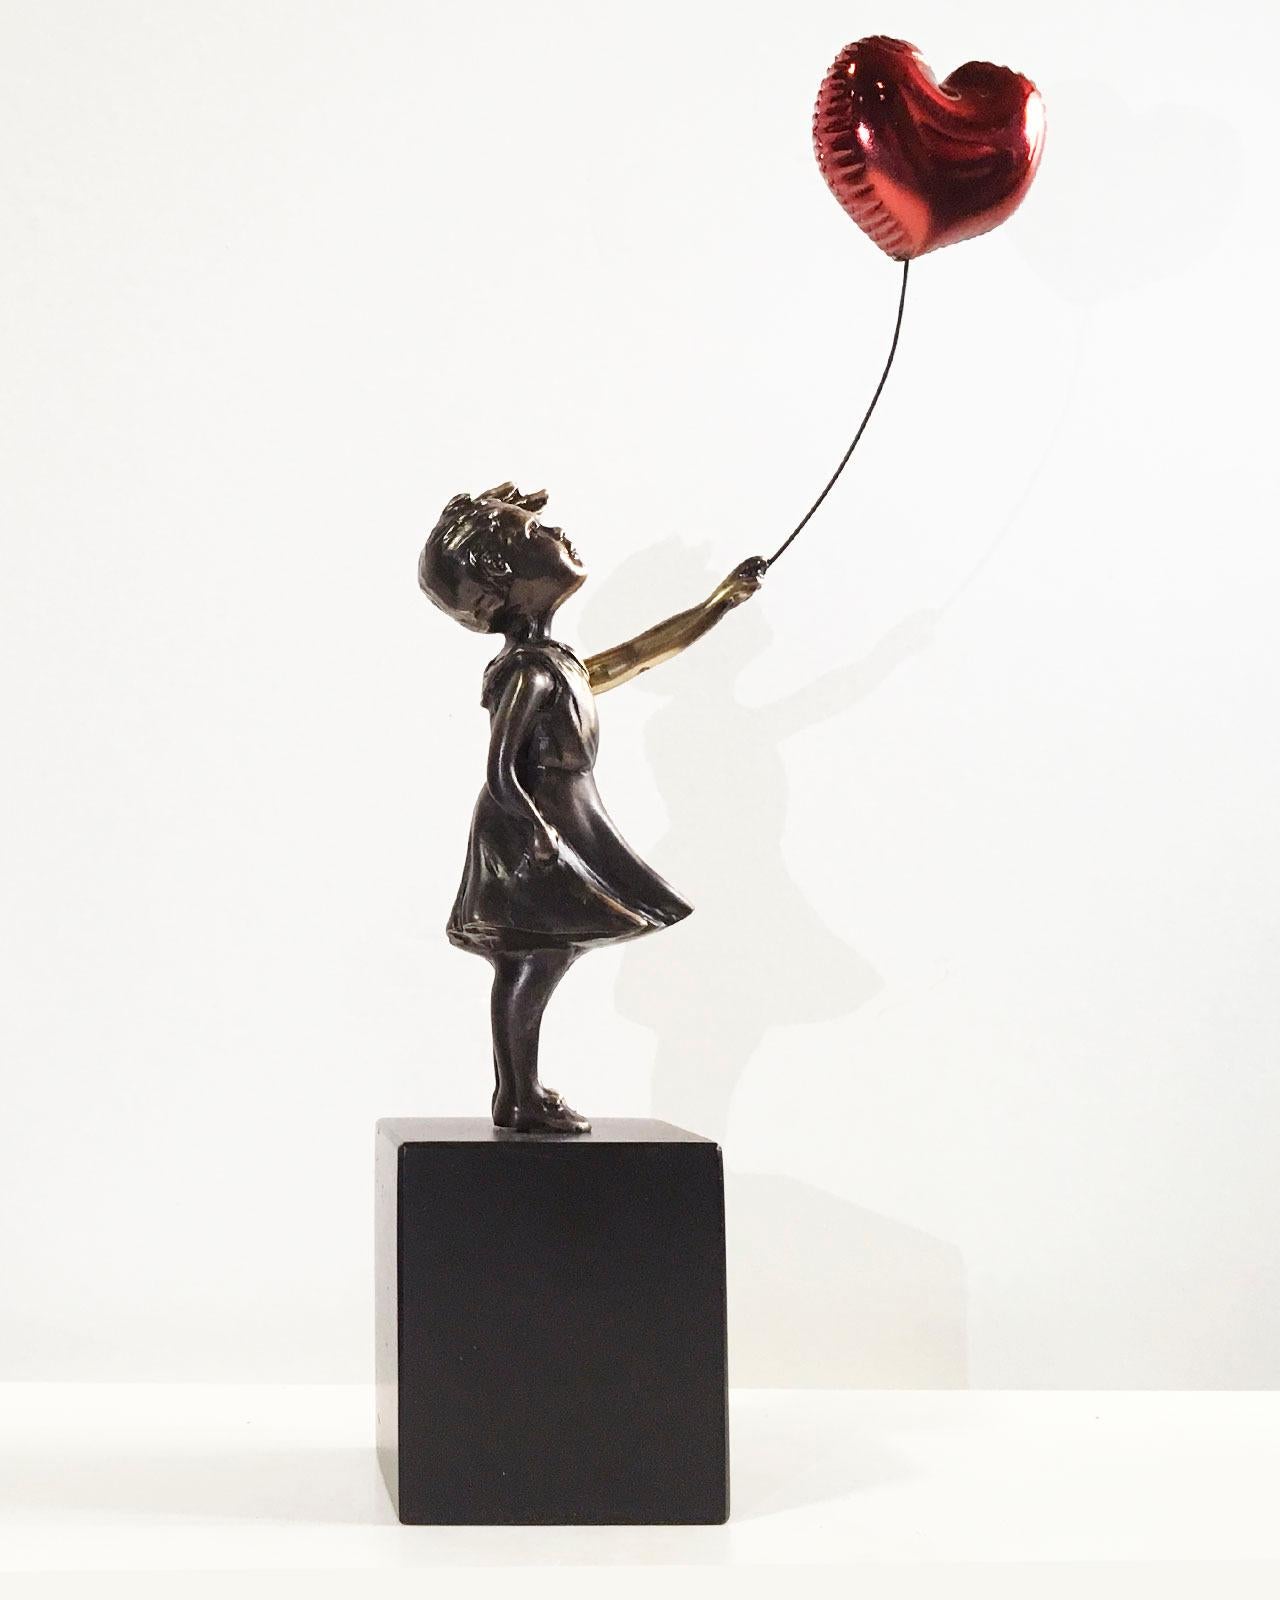 Street Art Sculpture "The girl and the balloon Big" by Miguel Guía.
This sculpture is made by lost wax bronze casting.
Limited edition of 199 works.
Although the required time to deliver a shipment is usually between 3 and 10 days please do not